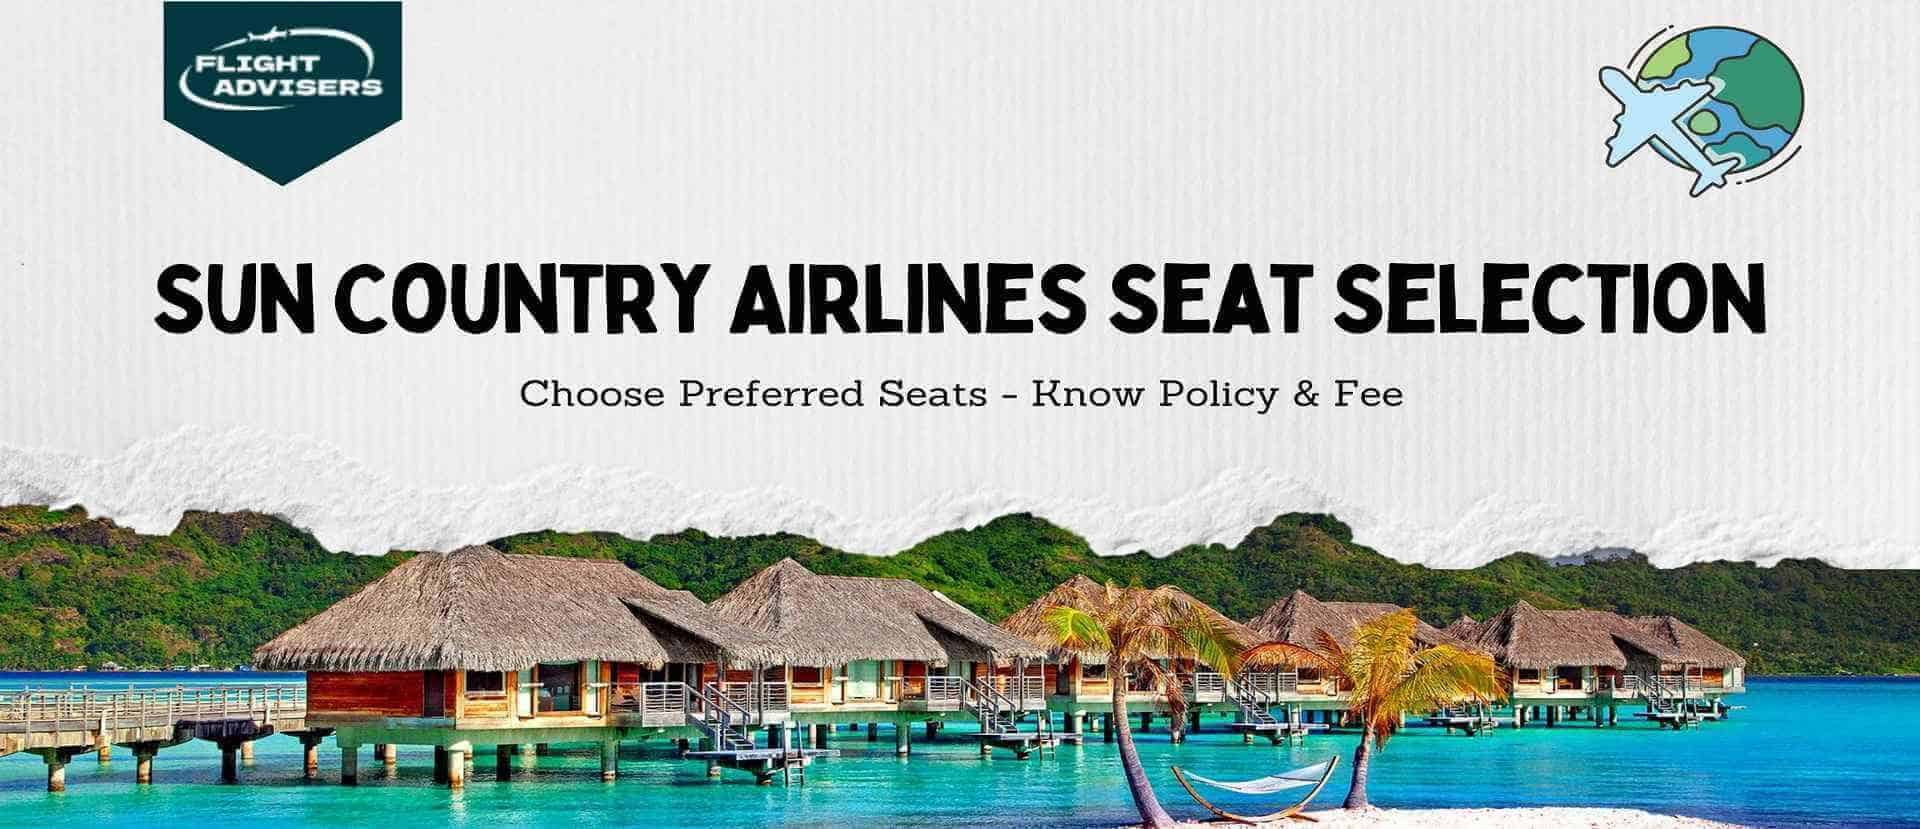 sun-country-airlines-seat-selection